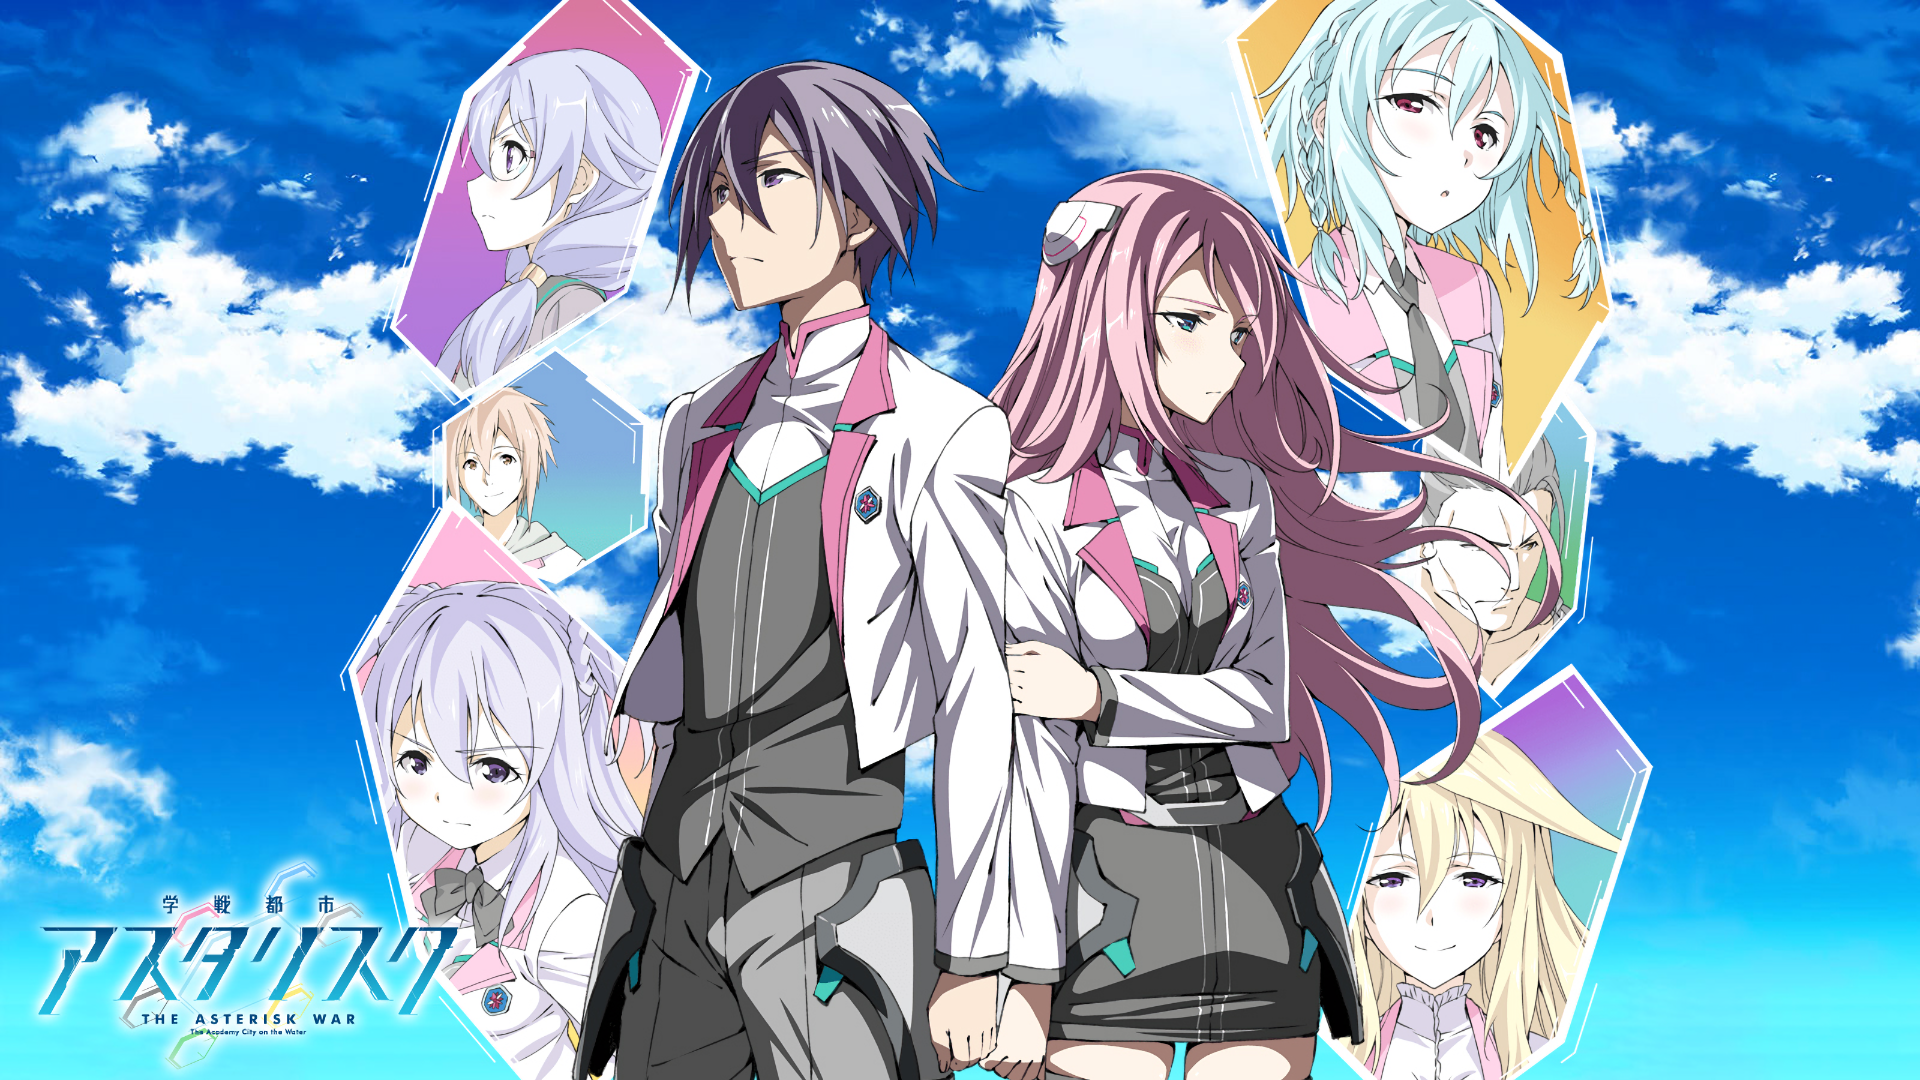 The Asterisk War: The Academy City On The Water #4